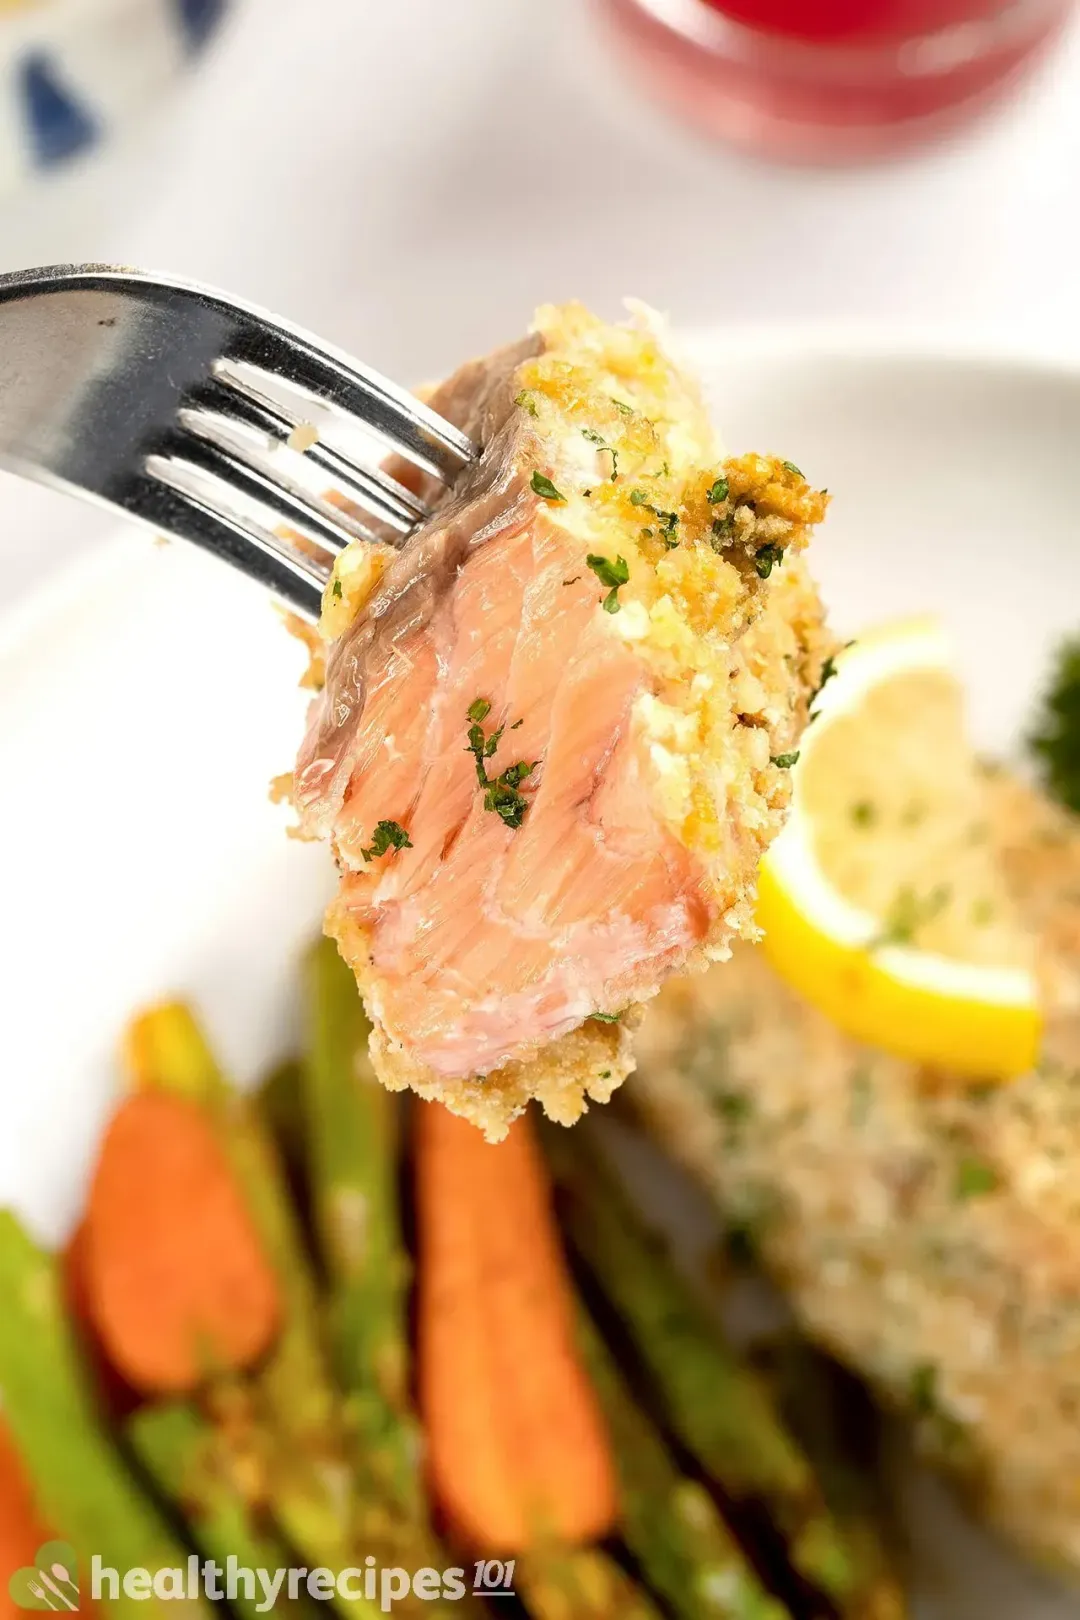 A fork lifting a pale orange piece of breadcrumb-crusted salmon with carrots and asparagus in the blurred background